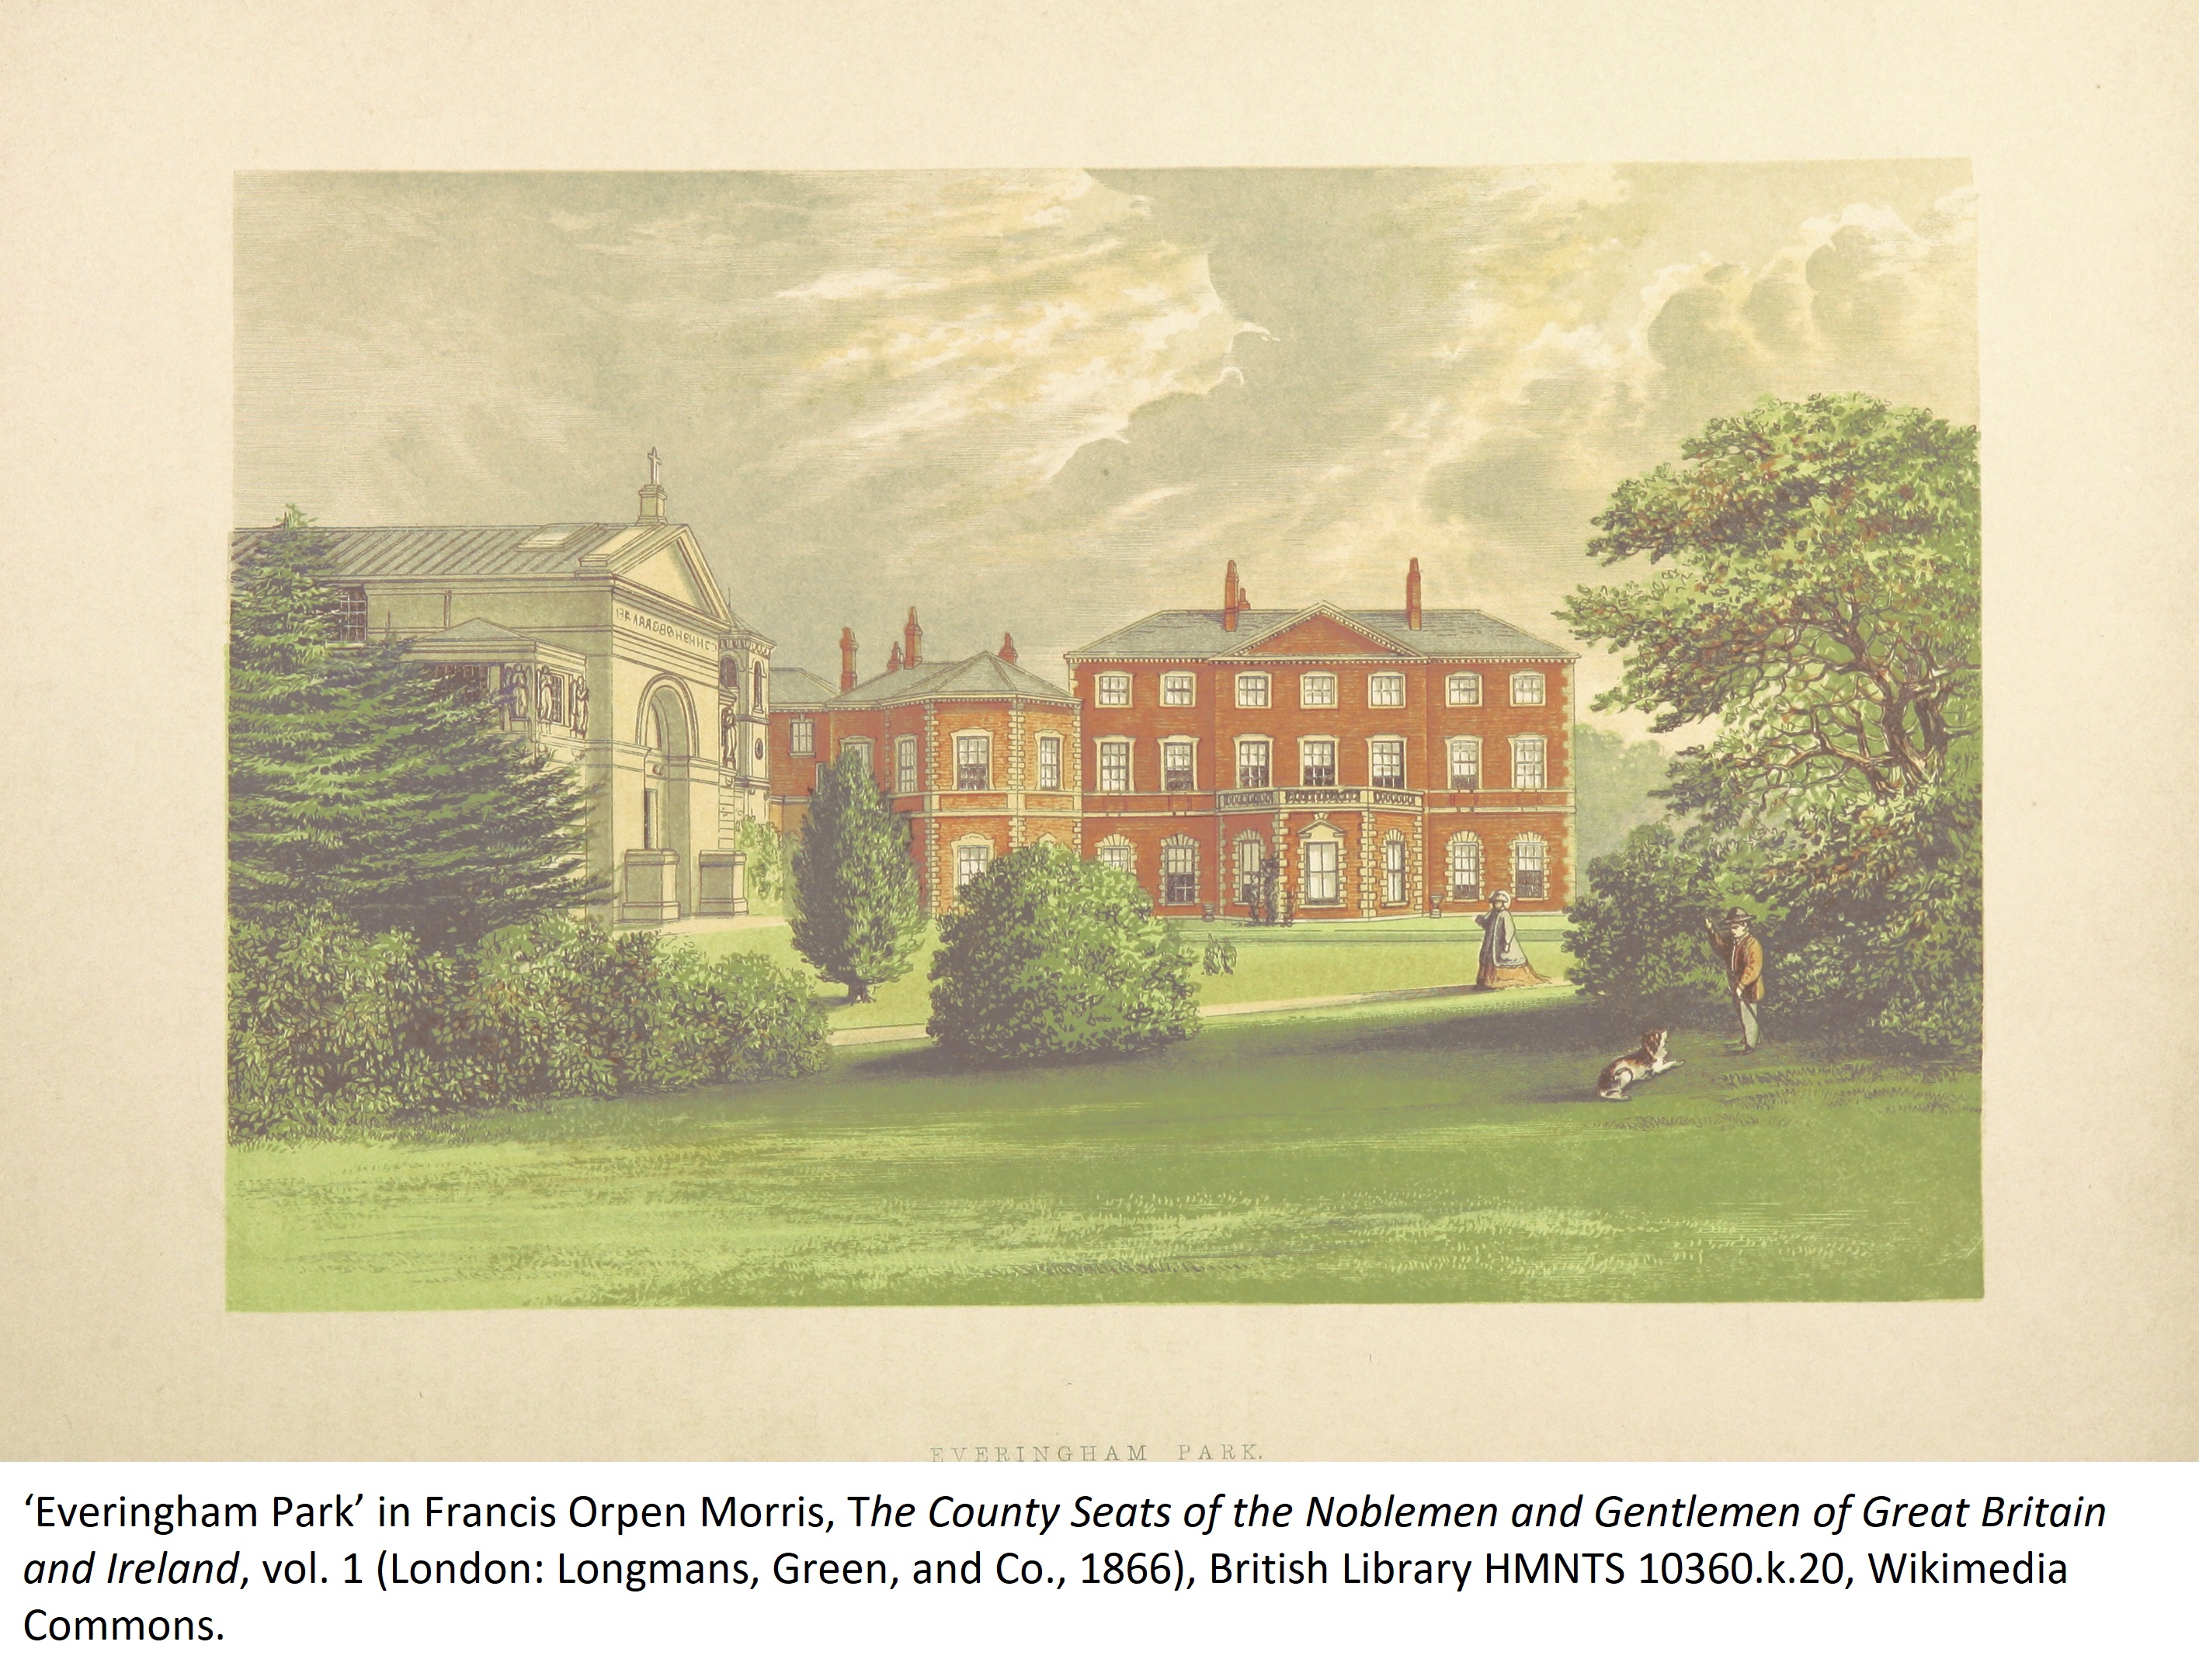 ‘Everingham Park’ in Francis Orpen Morris, The County Seats of the Noblemen and Gentlemen of Great Britain and Ireland, vol. 1 (London: Longmans, Green, and Co., 1866), British Library HMNTS 10360.k.20, Wikimedia Commons.